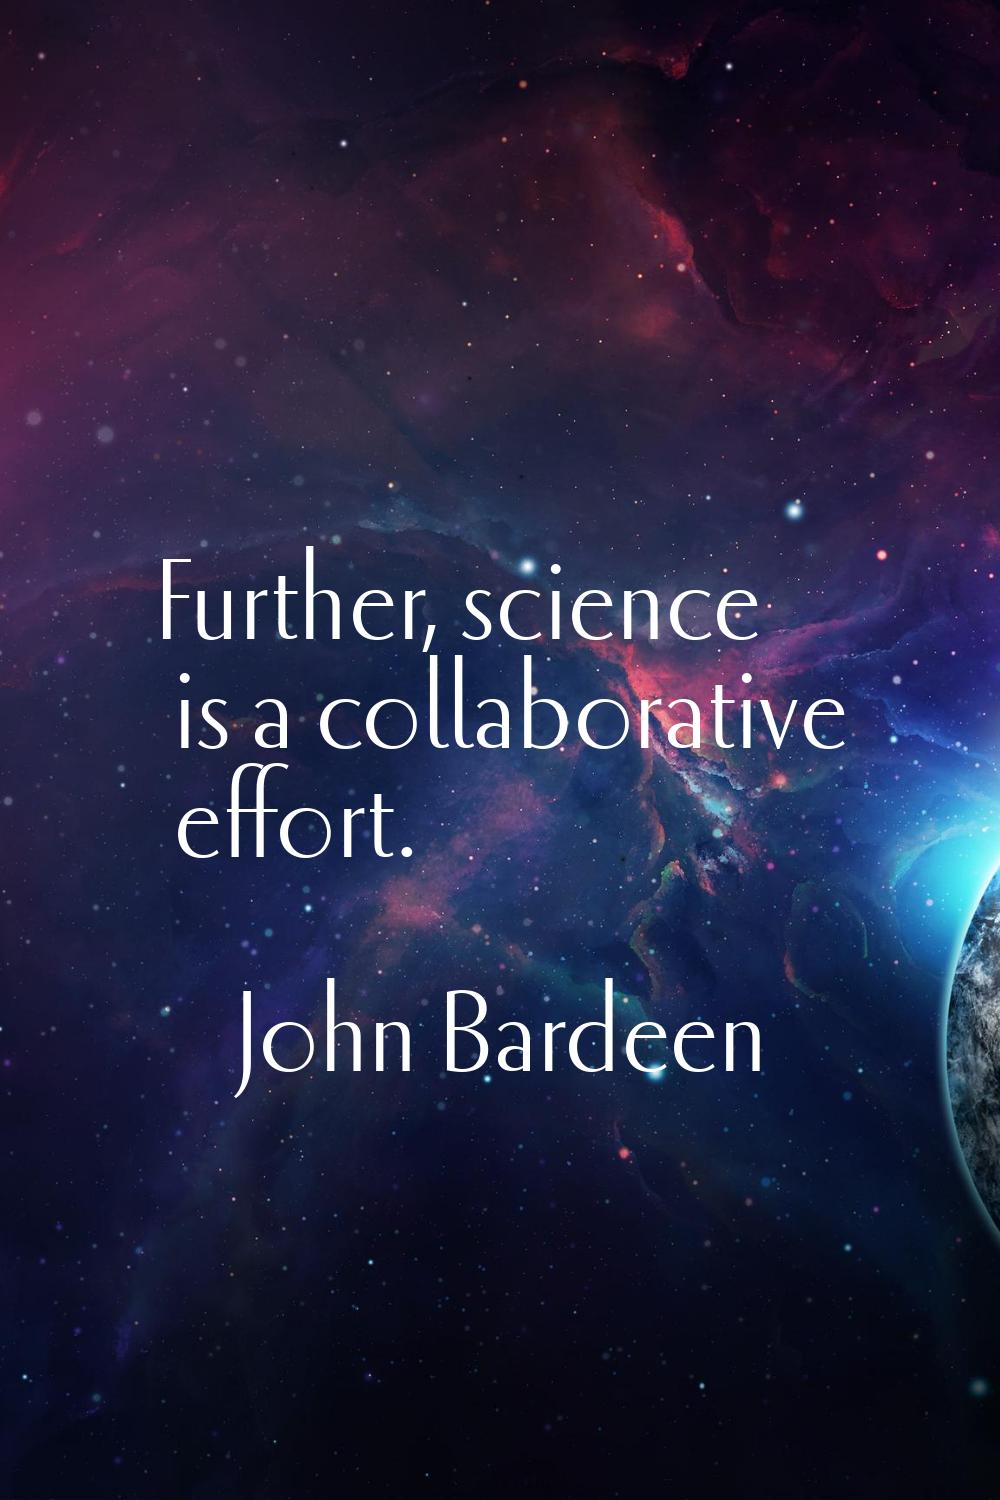 Further, science is a collaborative effort.